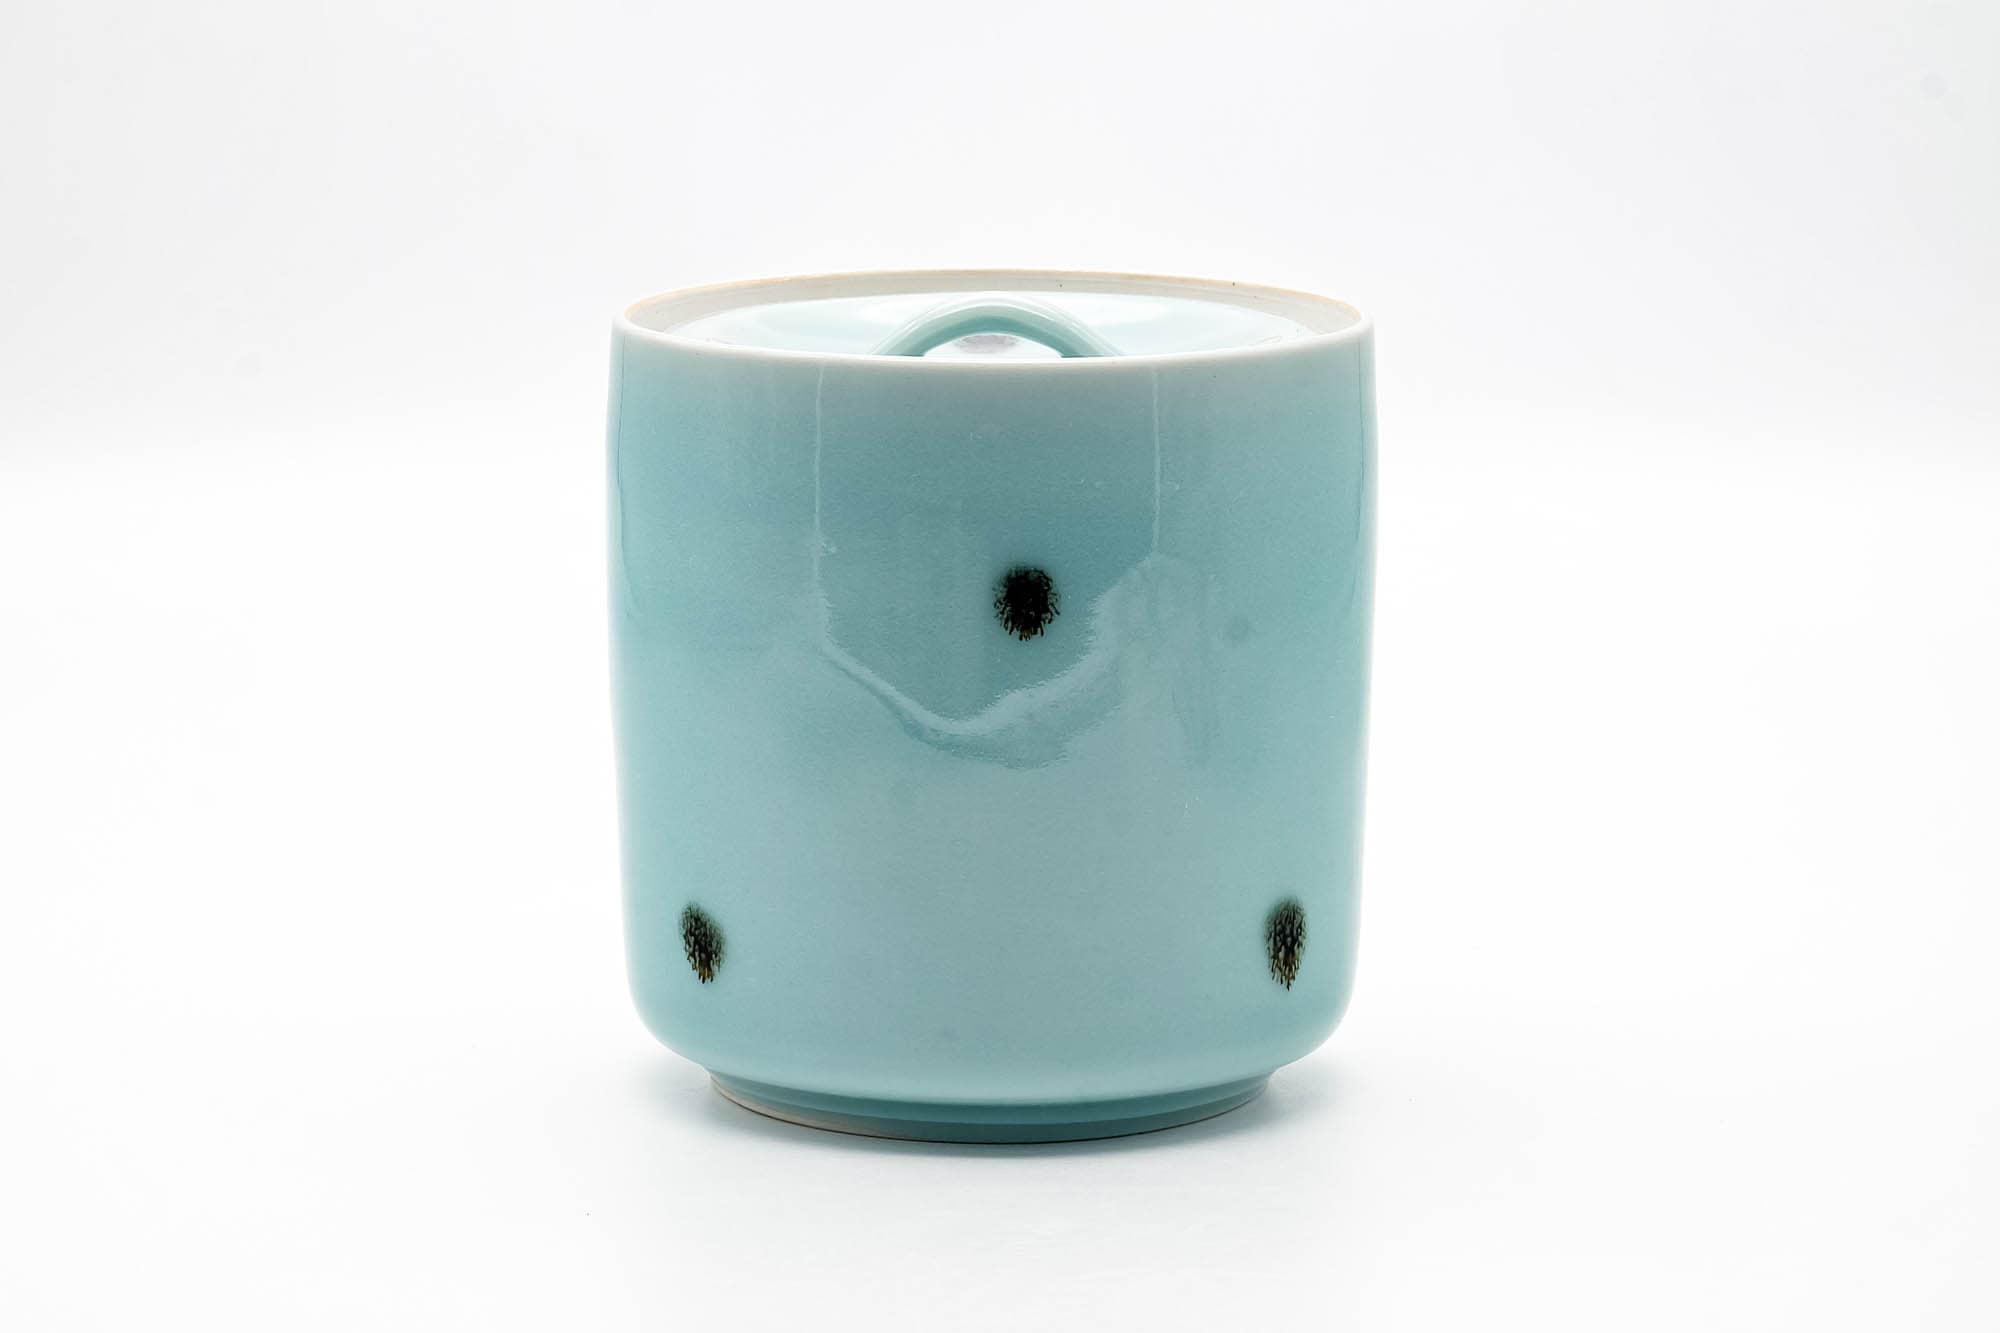 Japanese Mizusashi - Spotted Teal Porcelain Fresh Water Container - 1200ml